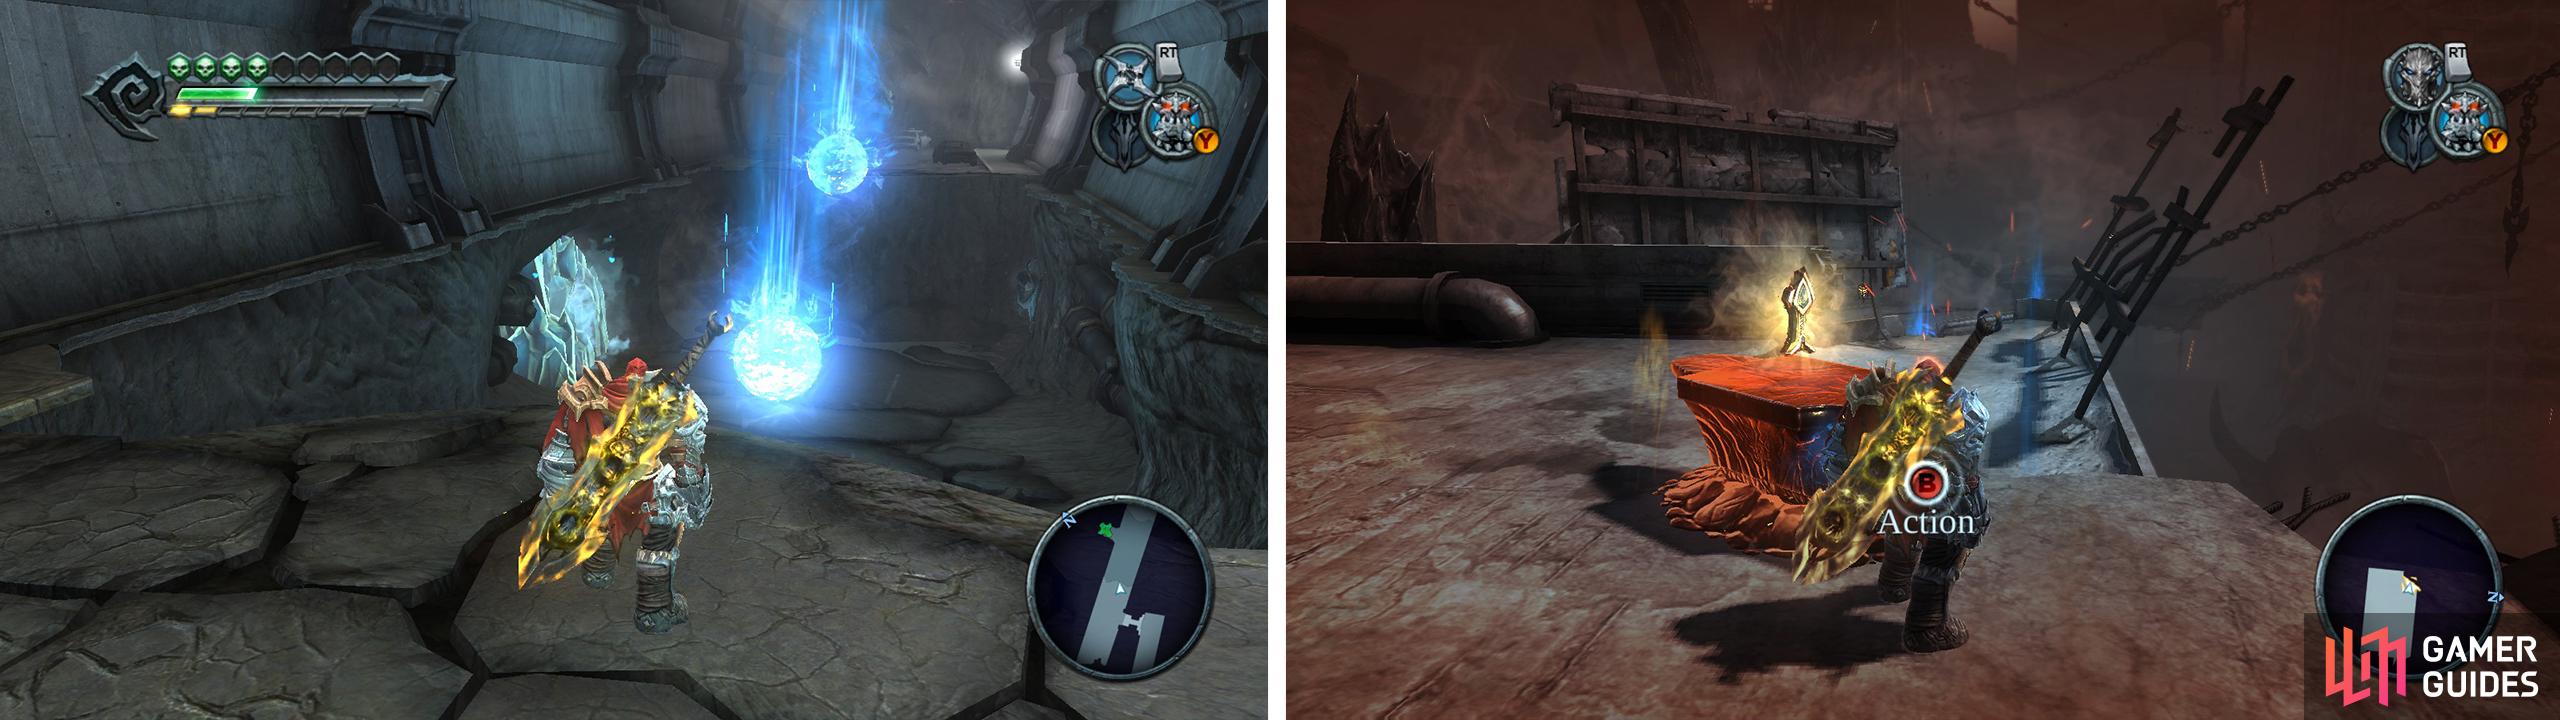 There is an Artefact behind blue crystals (left) on the path between the Choking Grounds and the Broken Stair. The next Armageddon Blade Shard can be found where we mounted the Angelic Beast (right).